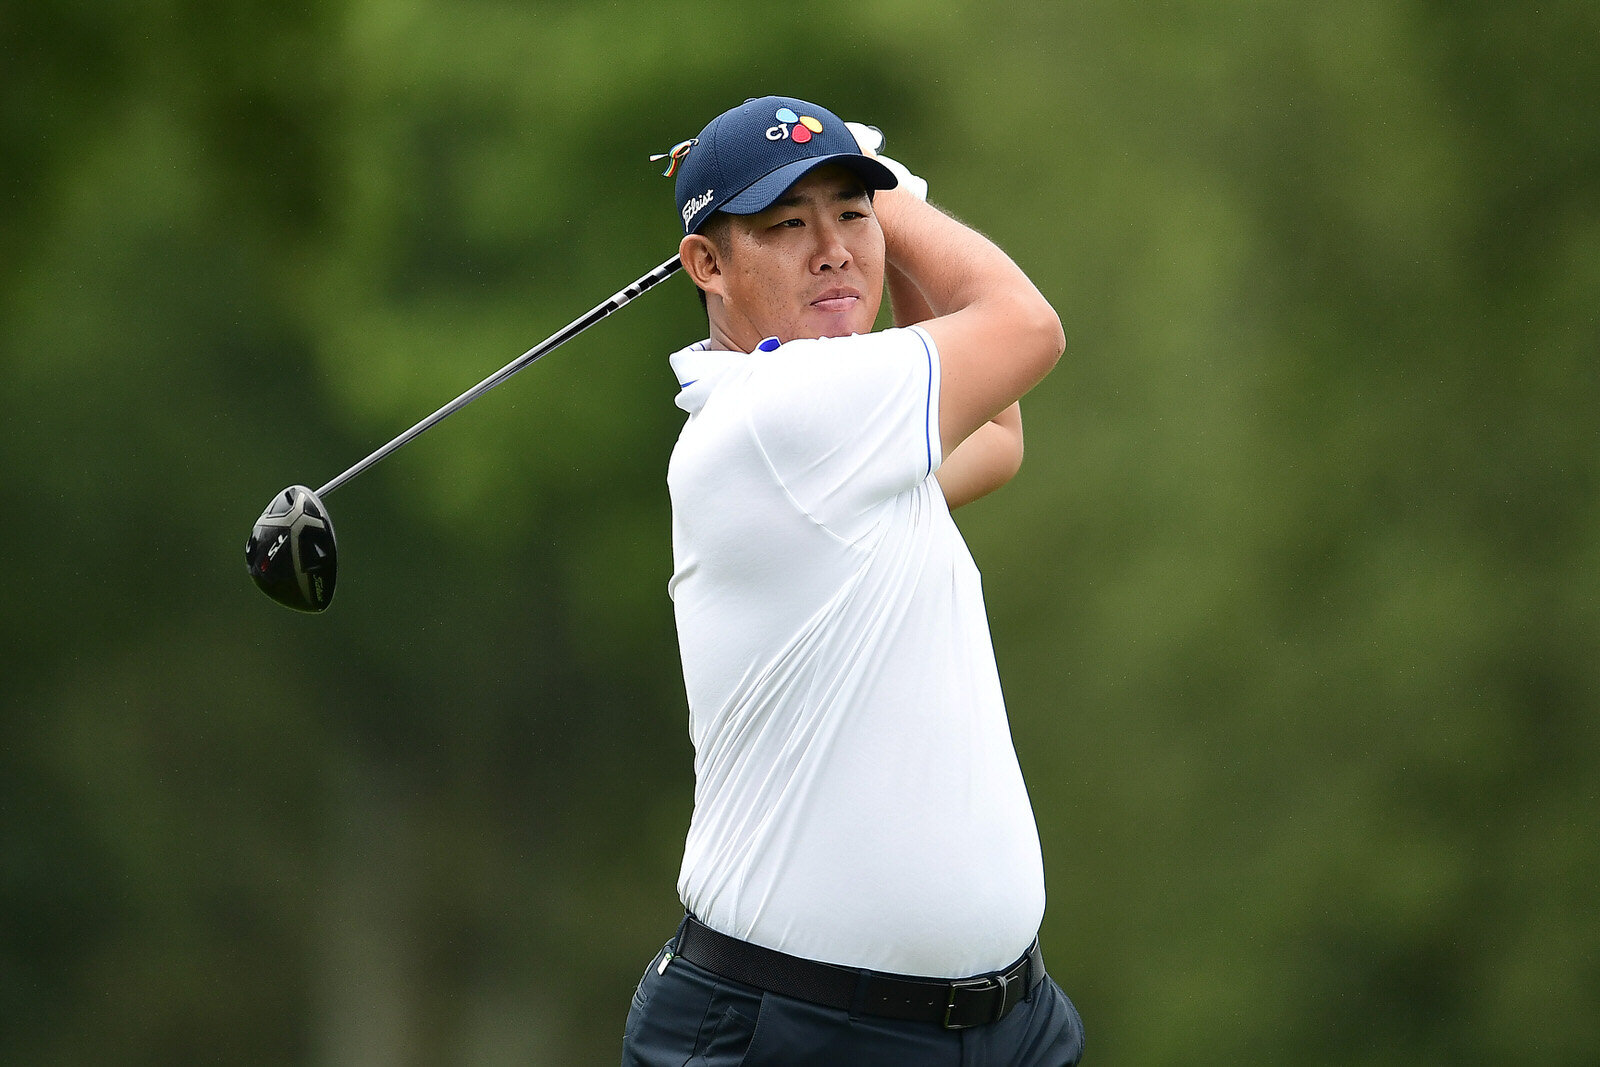  MEMPHIS, TENNESSEE - AUGUST 01: Byeong Hun An of Korea plays his shot from the second tee during the third round of the World Golf Championship-FedEx St Jude Invitational at TPC Southwind on August 01, 2020 in Memphis, Tennessee. (Photo by Stacy Rev